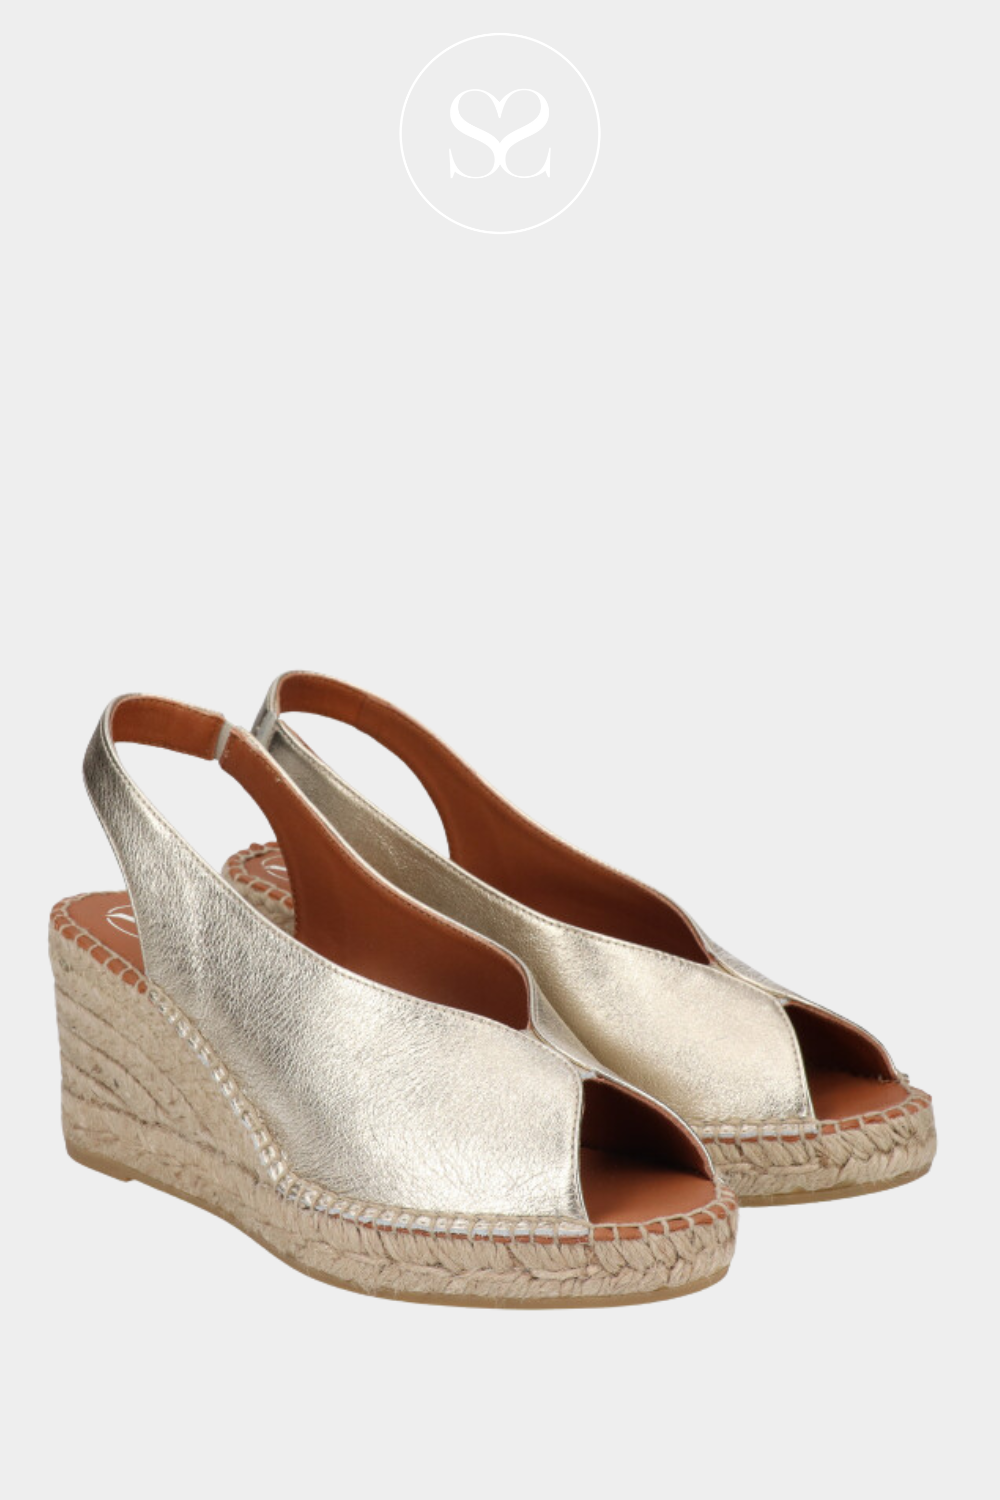 VIGUERA 2127 GOLD WEDGE ESPADRILLE SANDALS WITH ELASTICATED SLINGBACK STRAP AND V-CUT AND A PEEPTOE